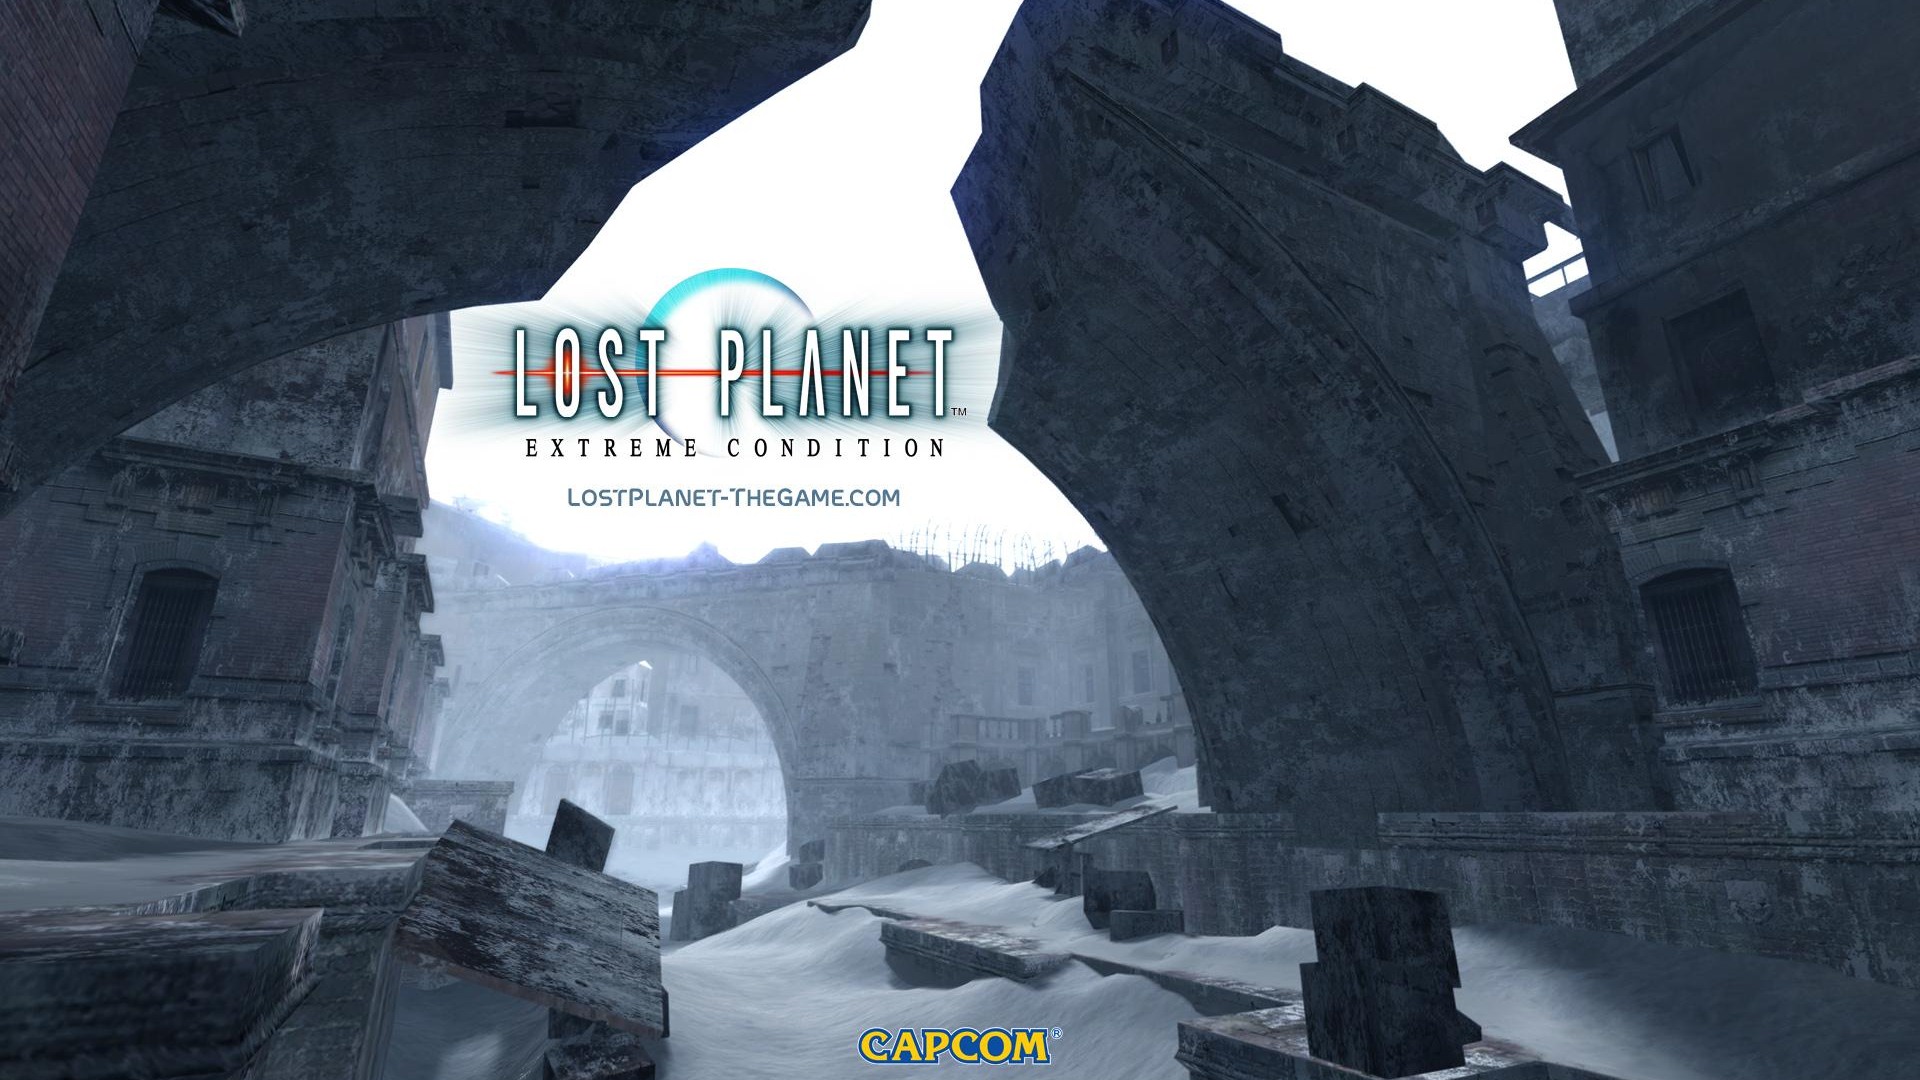 Lost Planet: Extreme Condition HD tapety na plochu #15 - 1920x1080